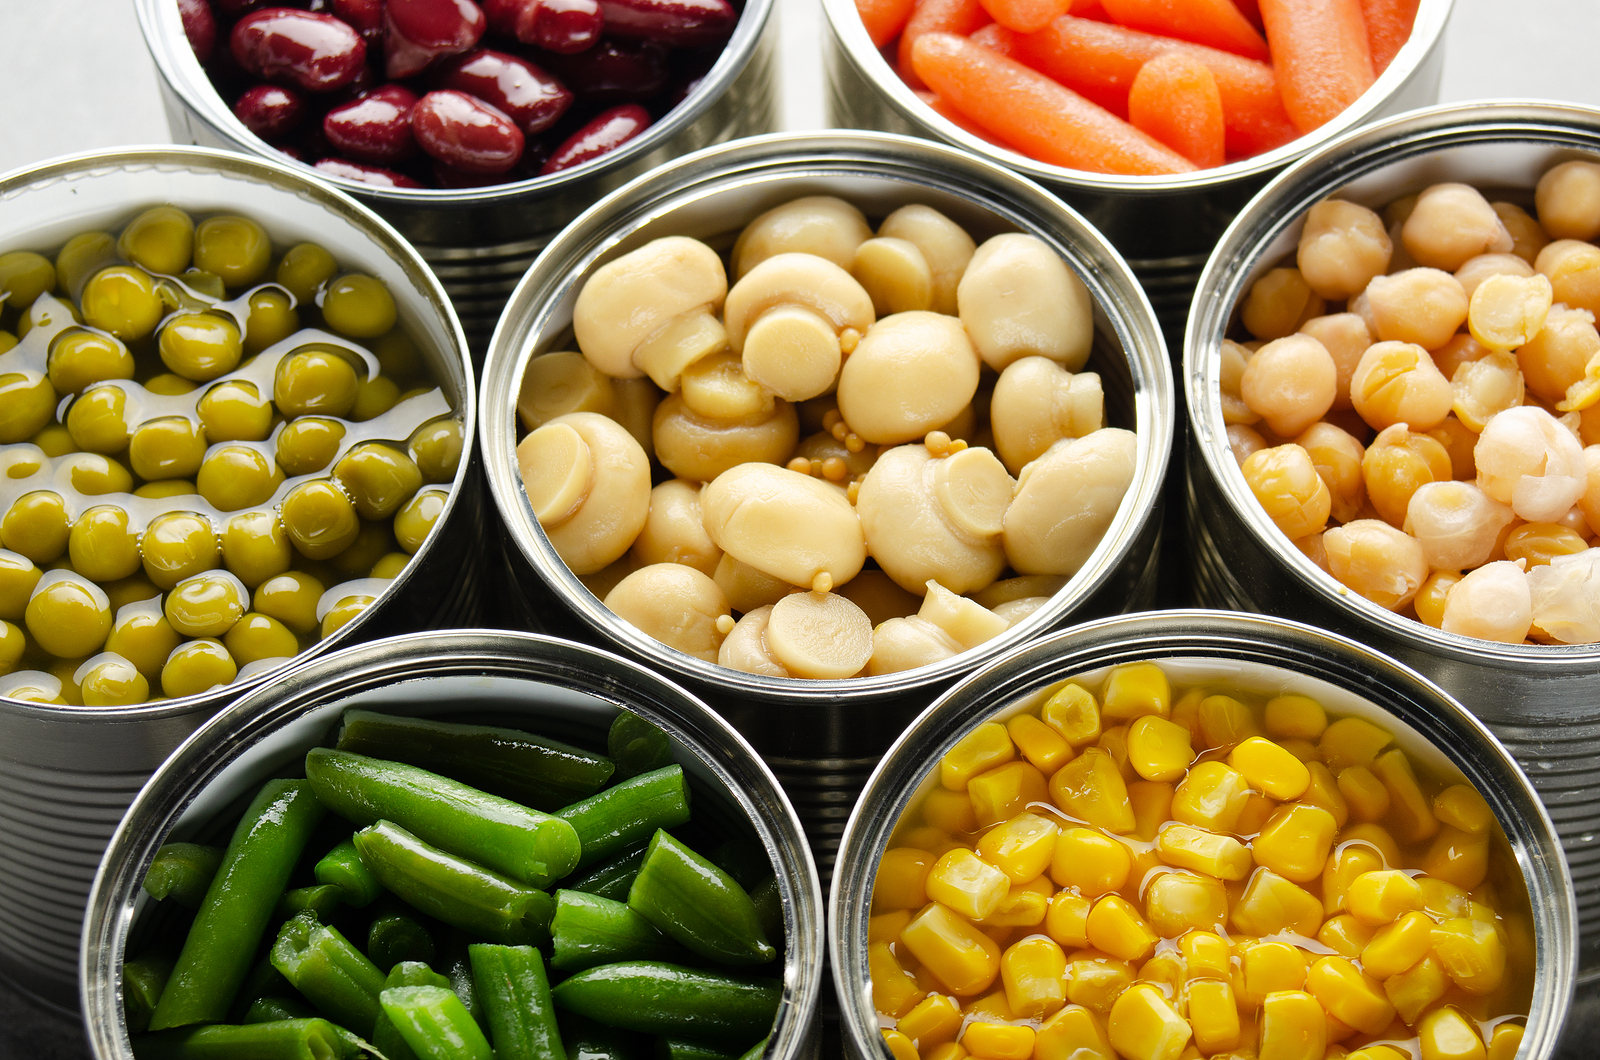 How Seniors Can Make Healthy Meals With Canned Food